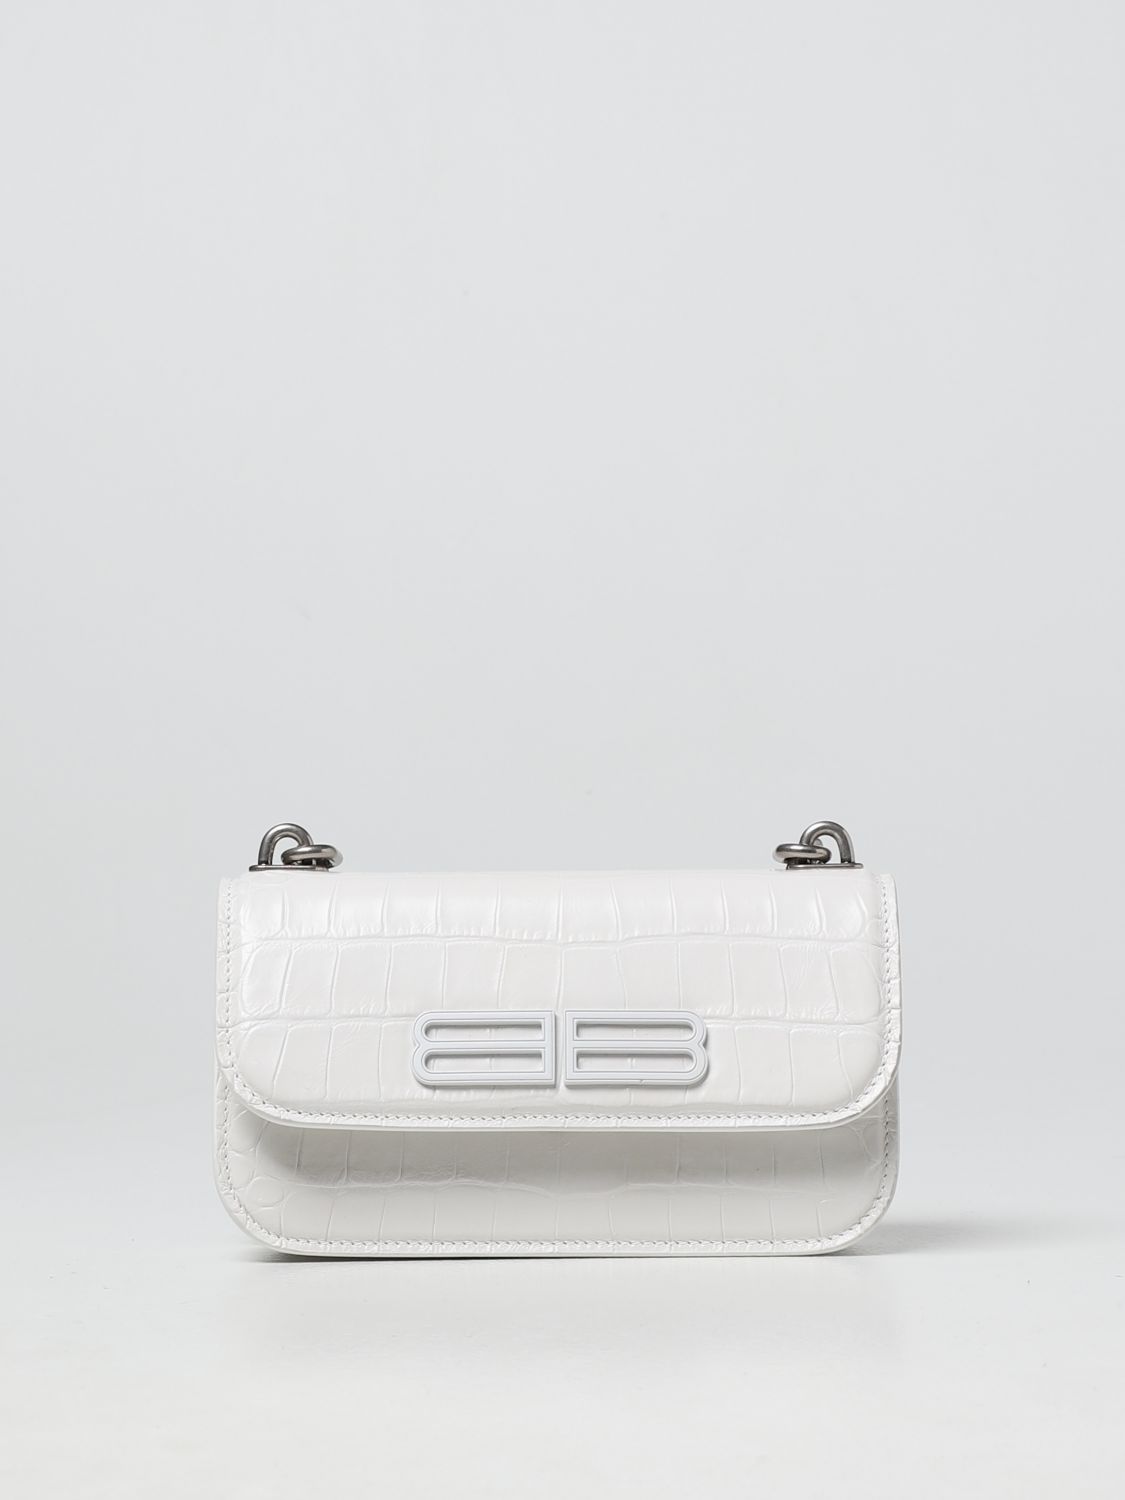 Balenciaga Everyday Ville Crossbody Bag White in Leather with Silvertone   US